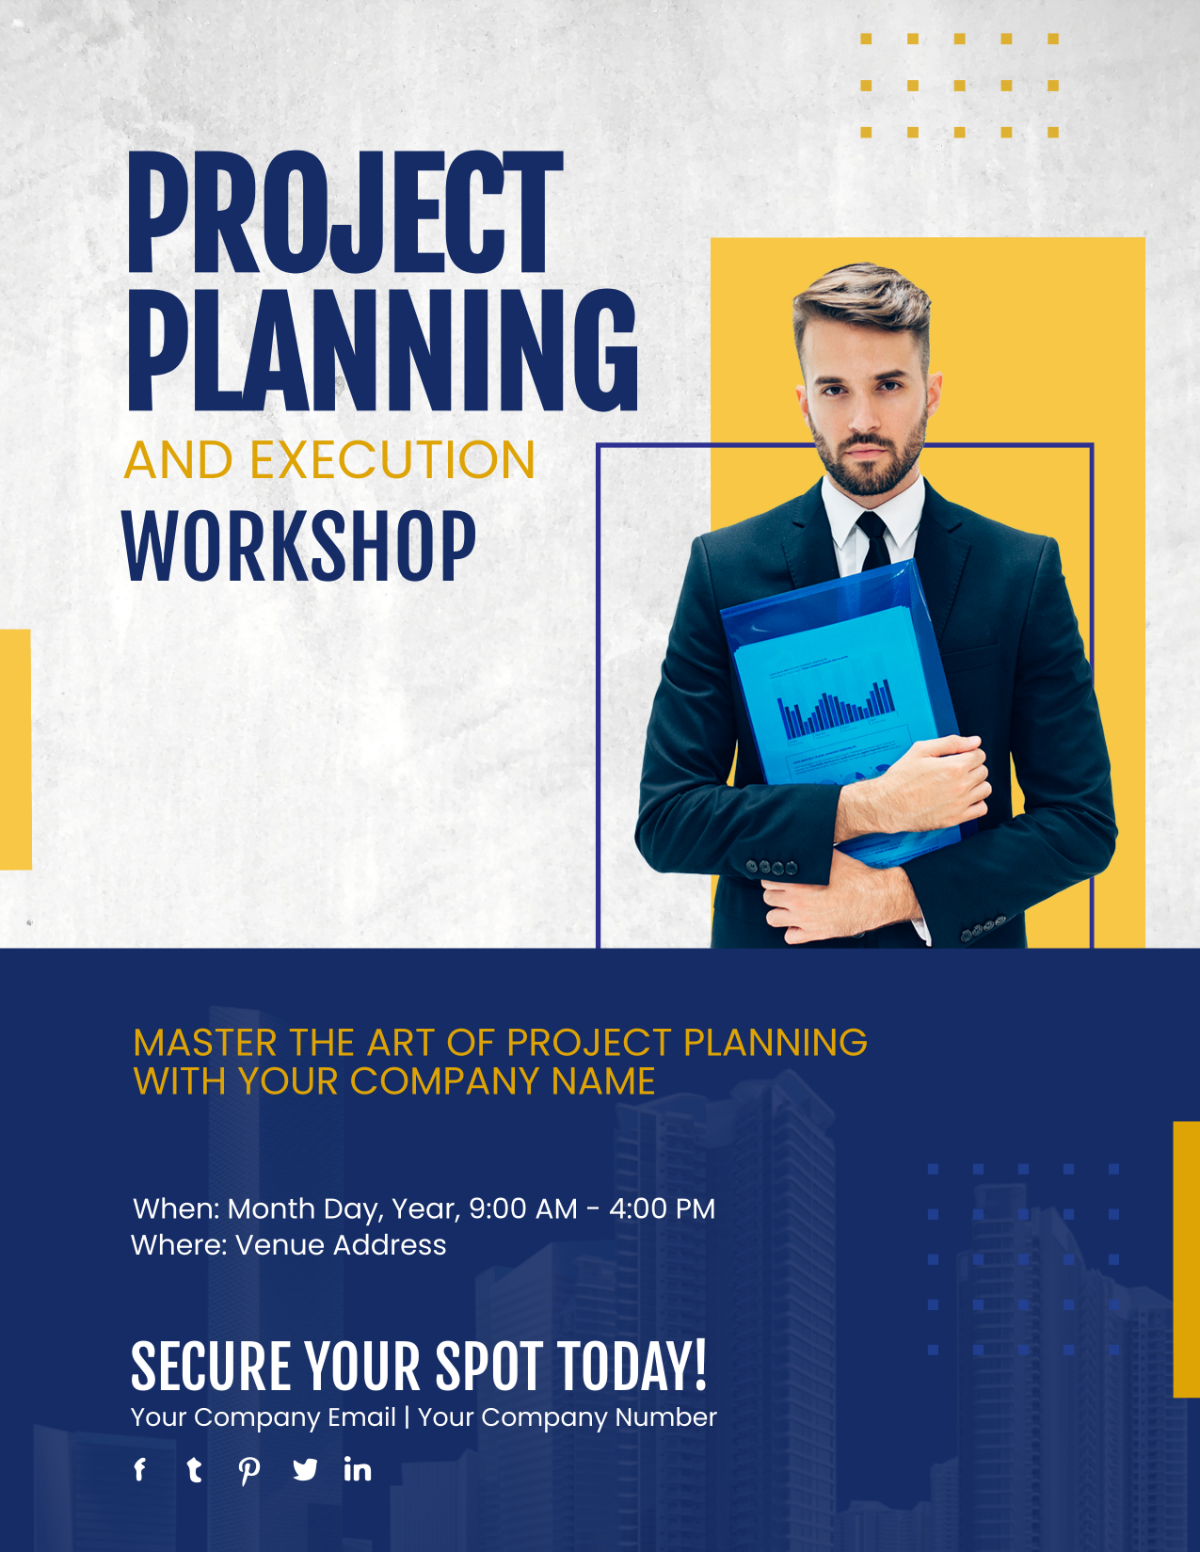 Project Planning and Execution Workshop Flyer Template